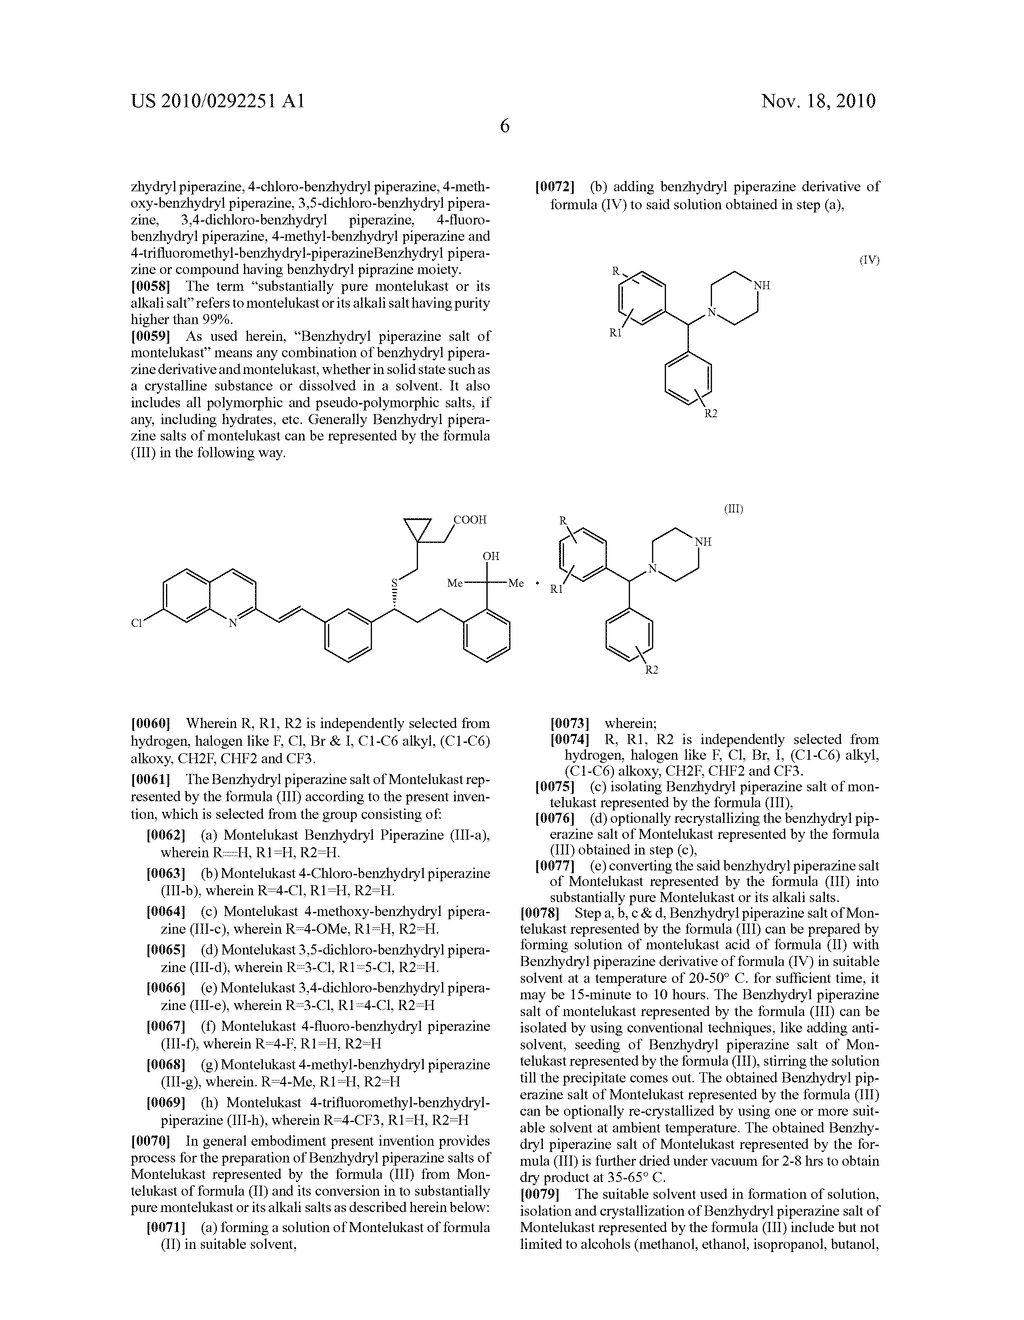 MONTELUKAST BENZHYDRYL PIPERAZINE SALTS AND PROCESS FOR PREPARATION THEREOF - diagram, schematic, and image 08